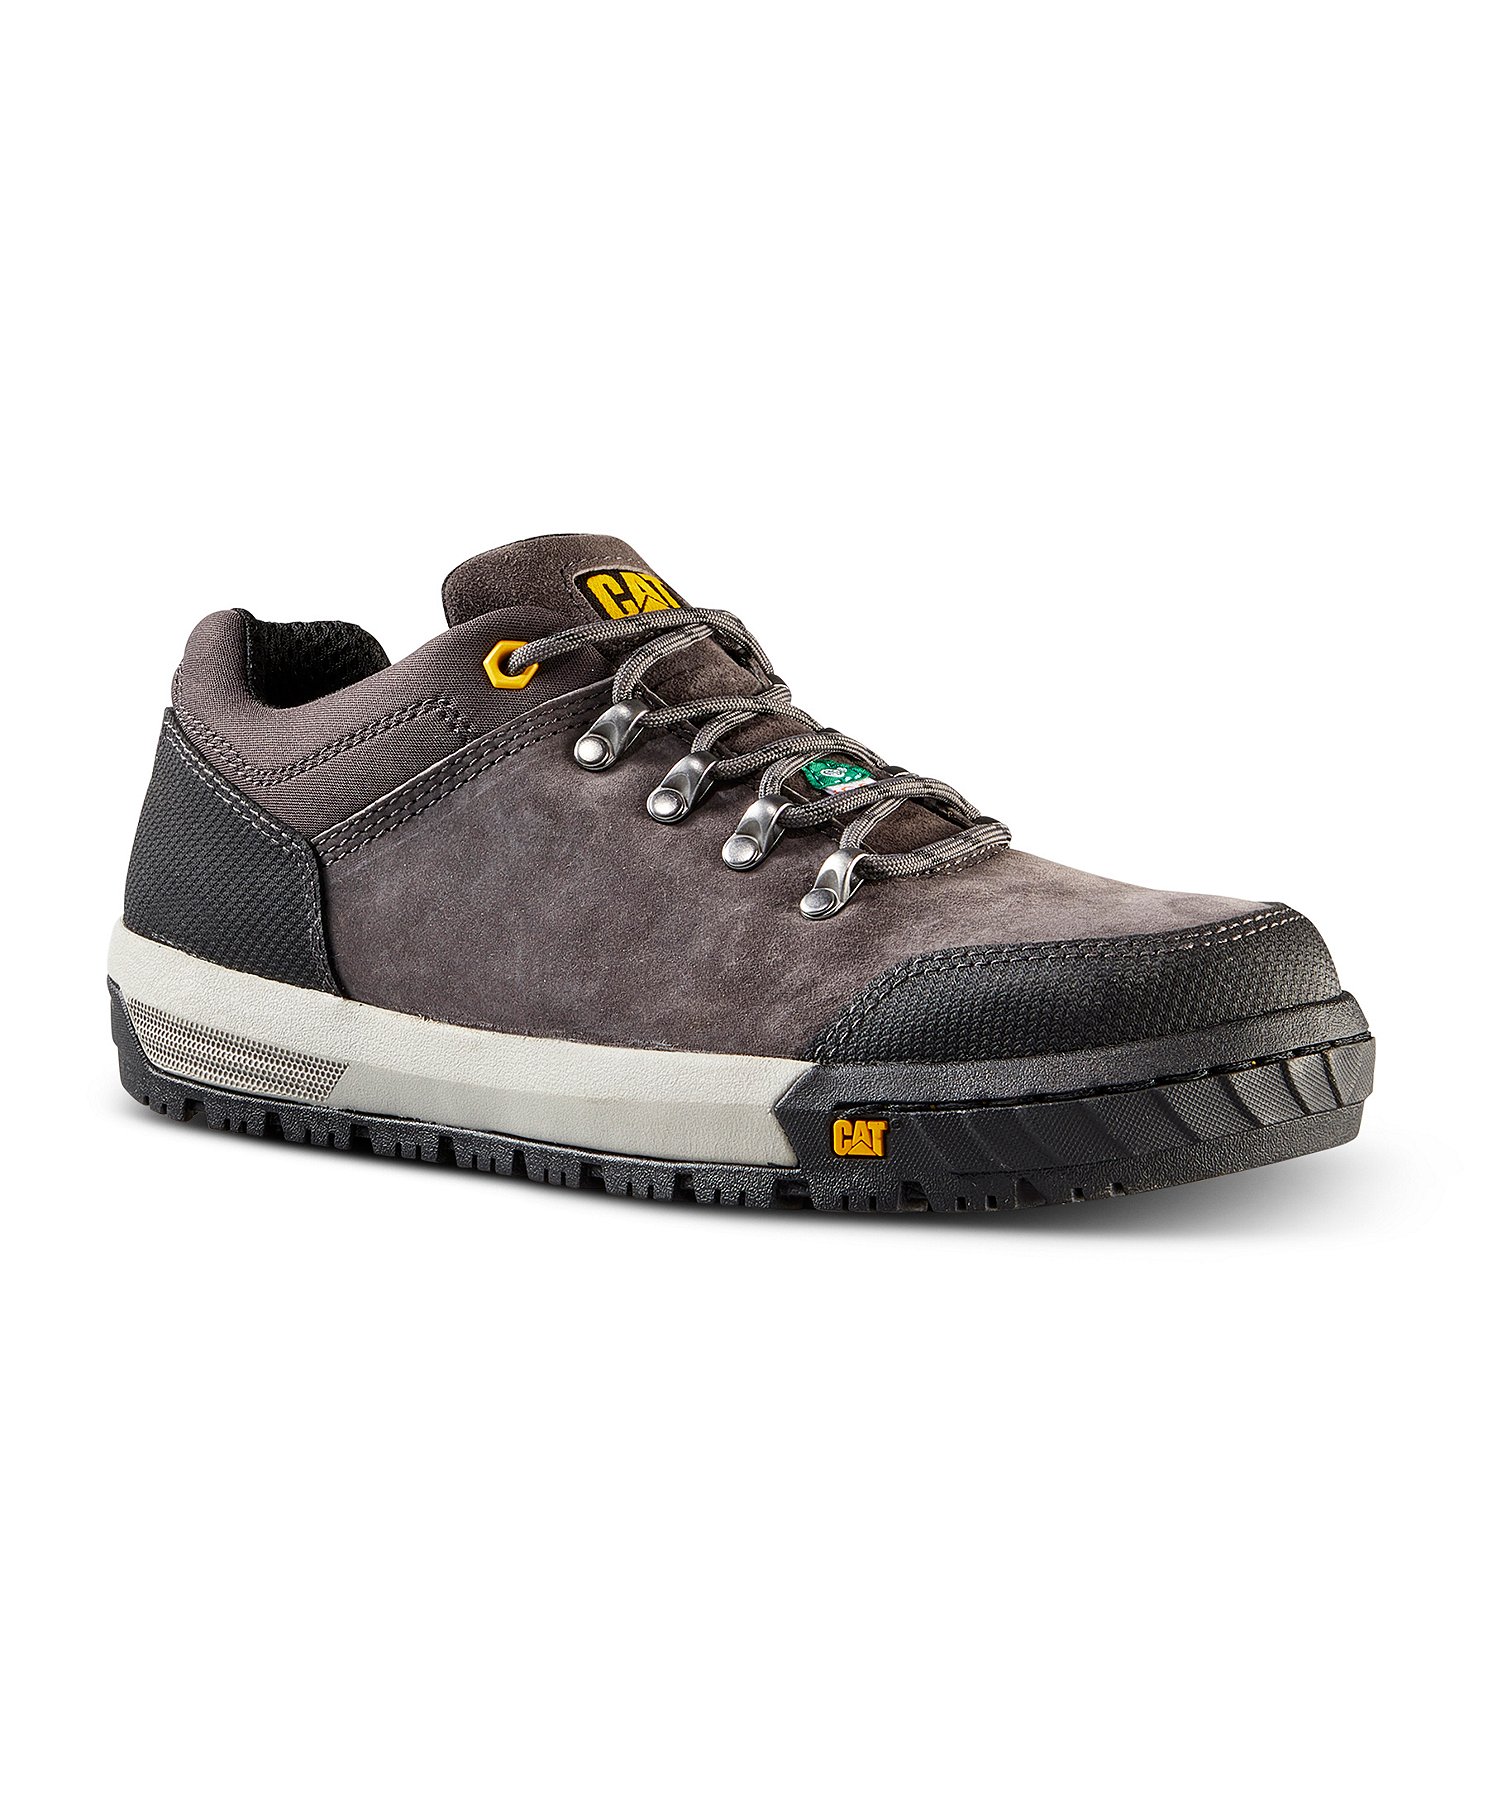 Caterpillar Safety Shoes For Men